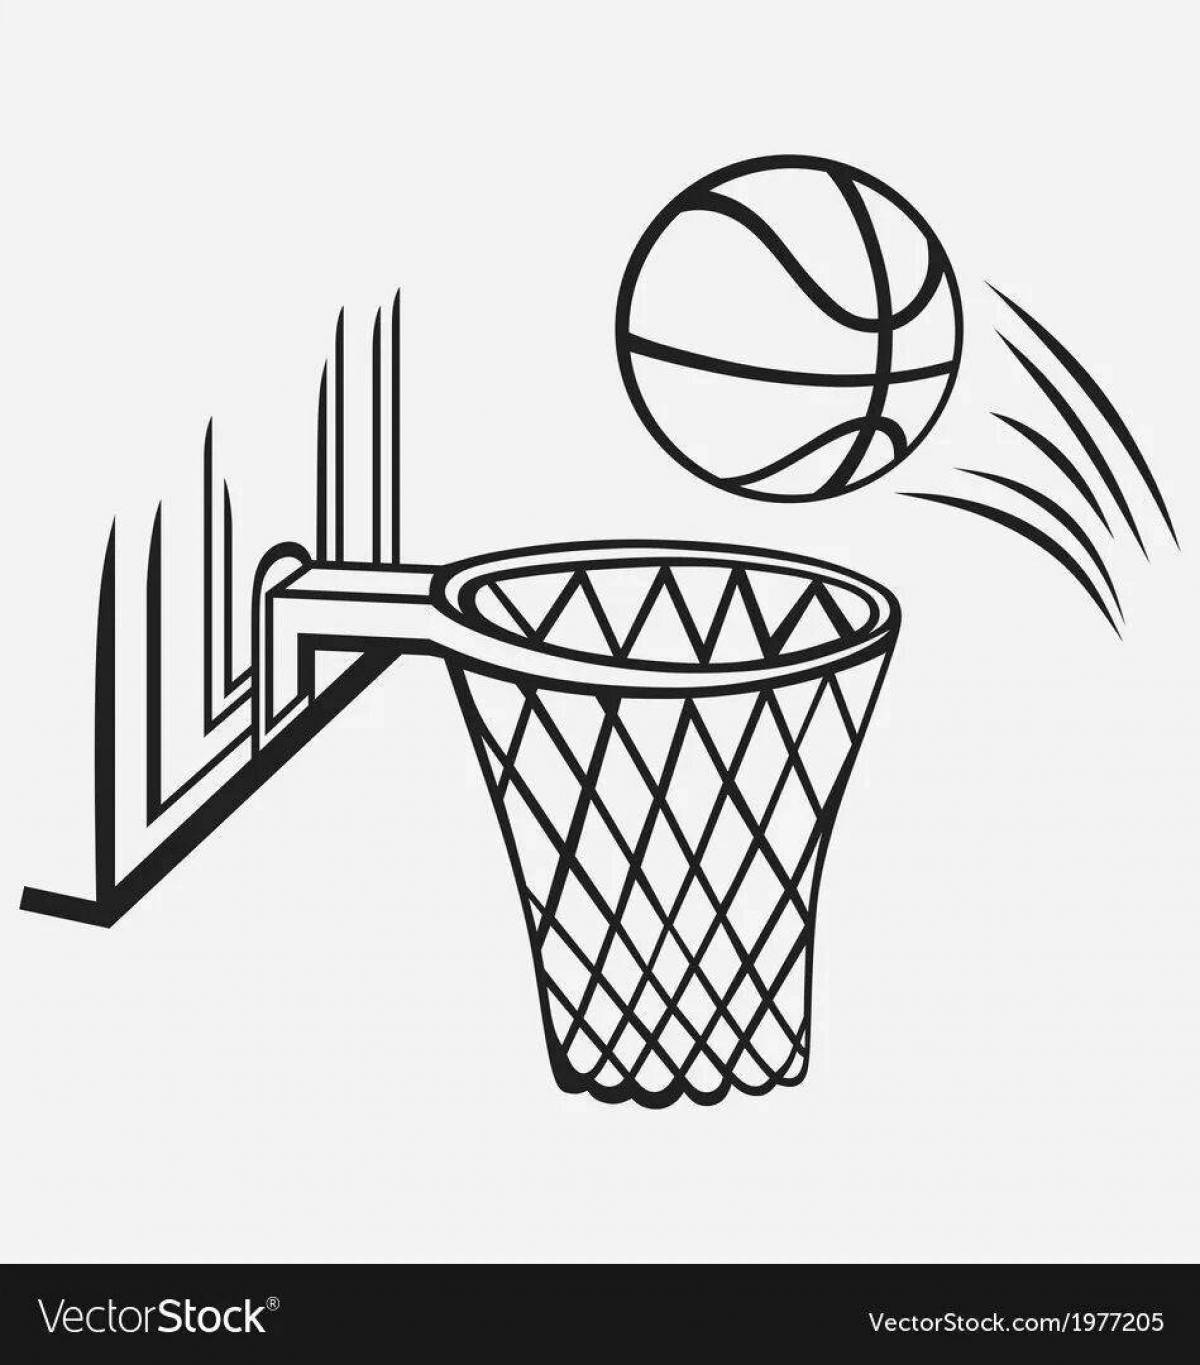 Playful basketball hoop coloring page